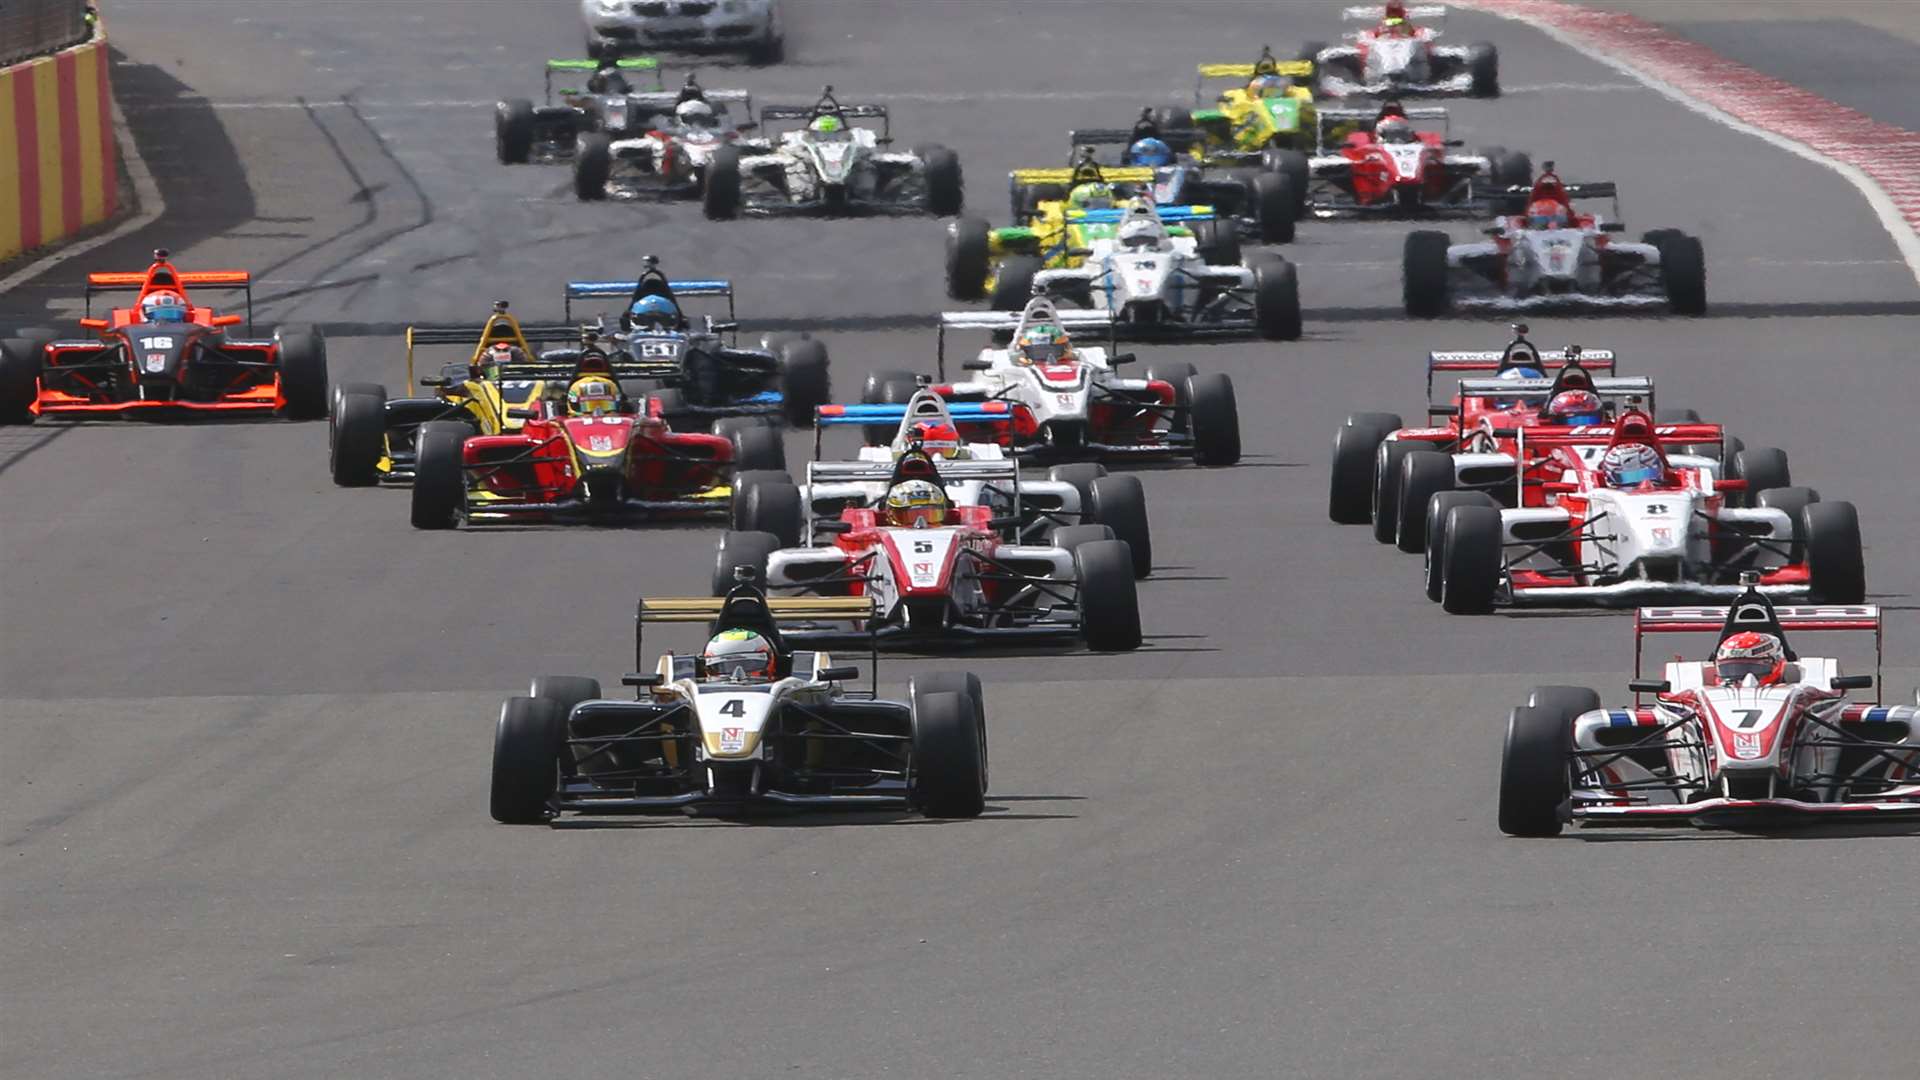 The BRDC F4 championship will provide single-seater support action. Picture - MSV Press Office